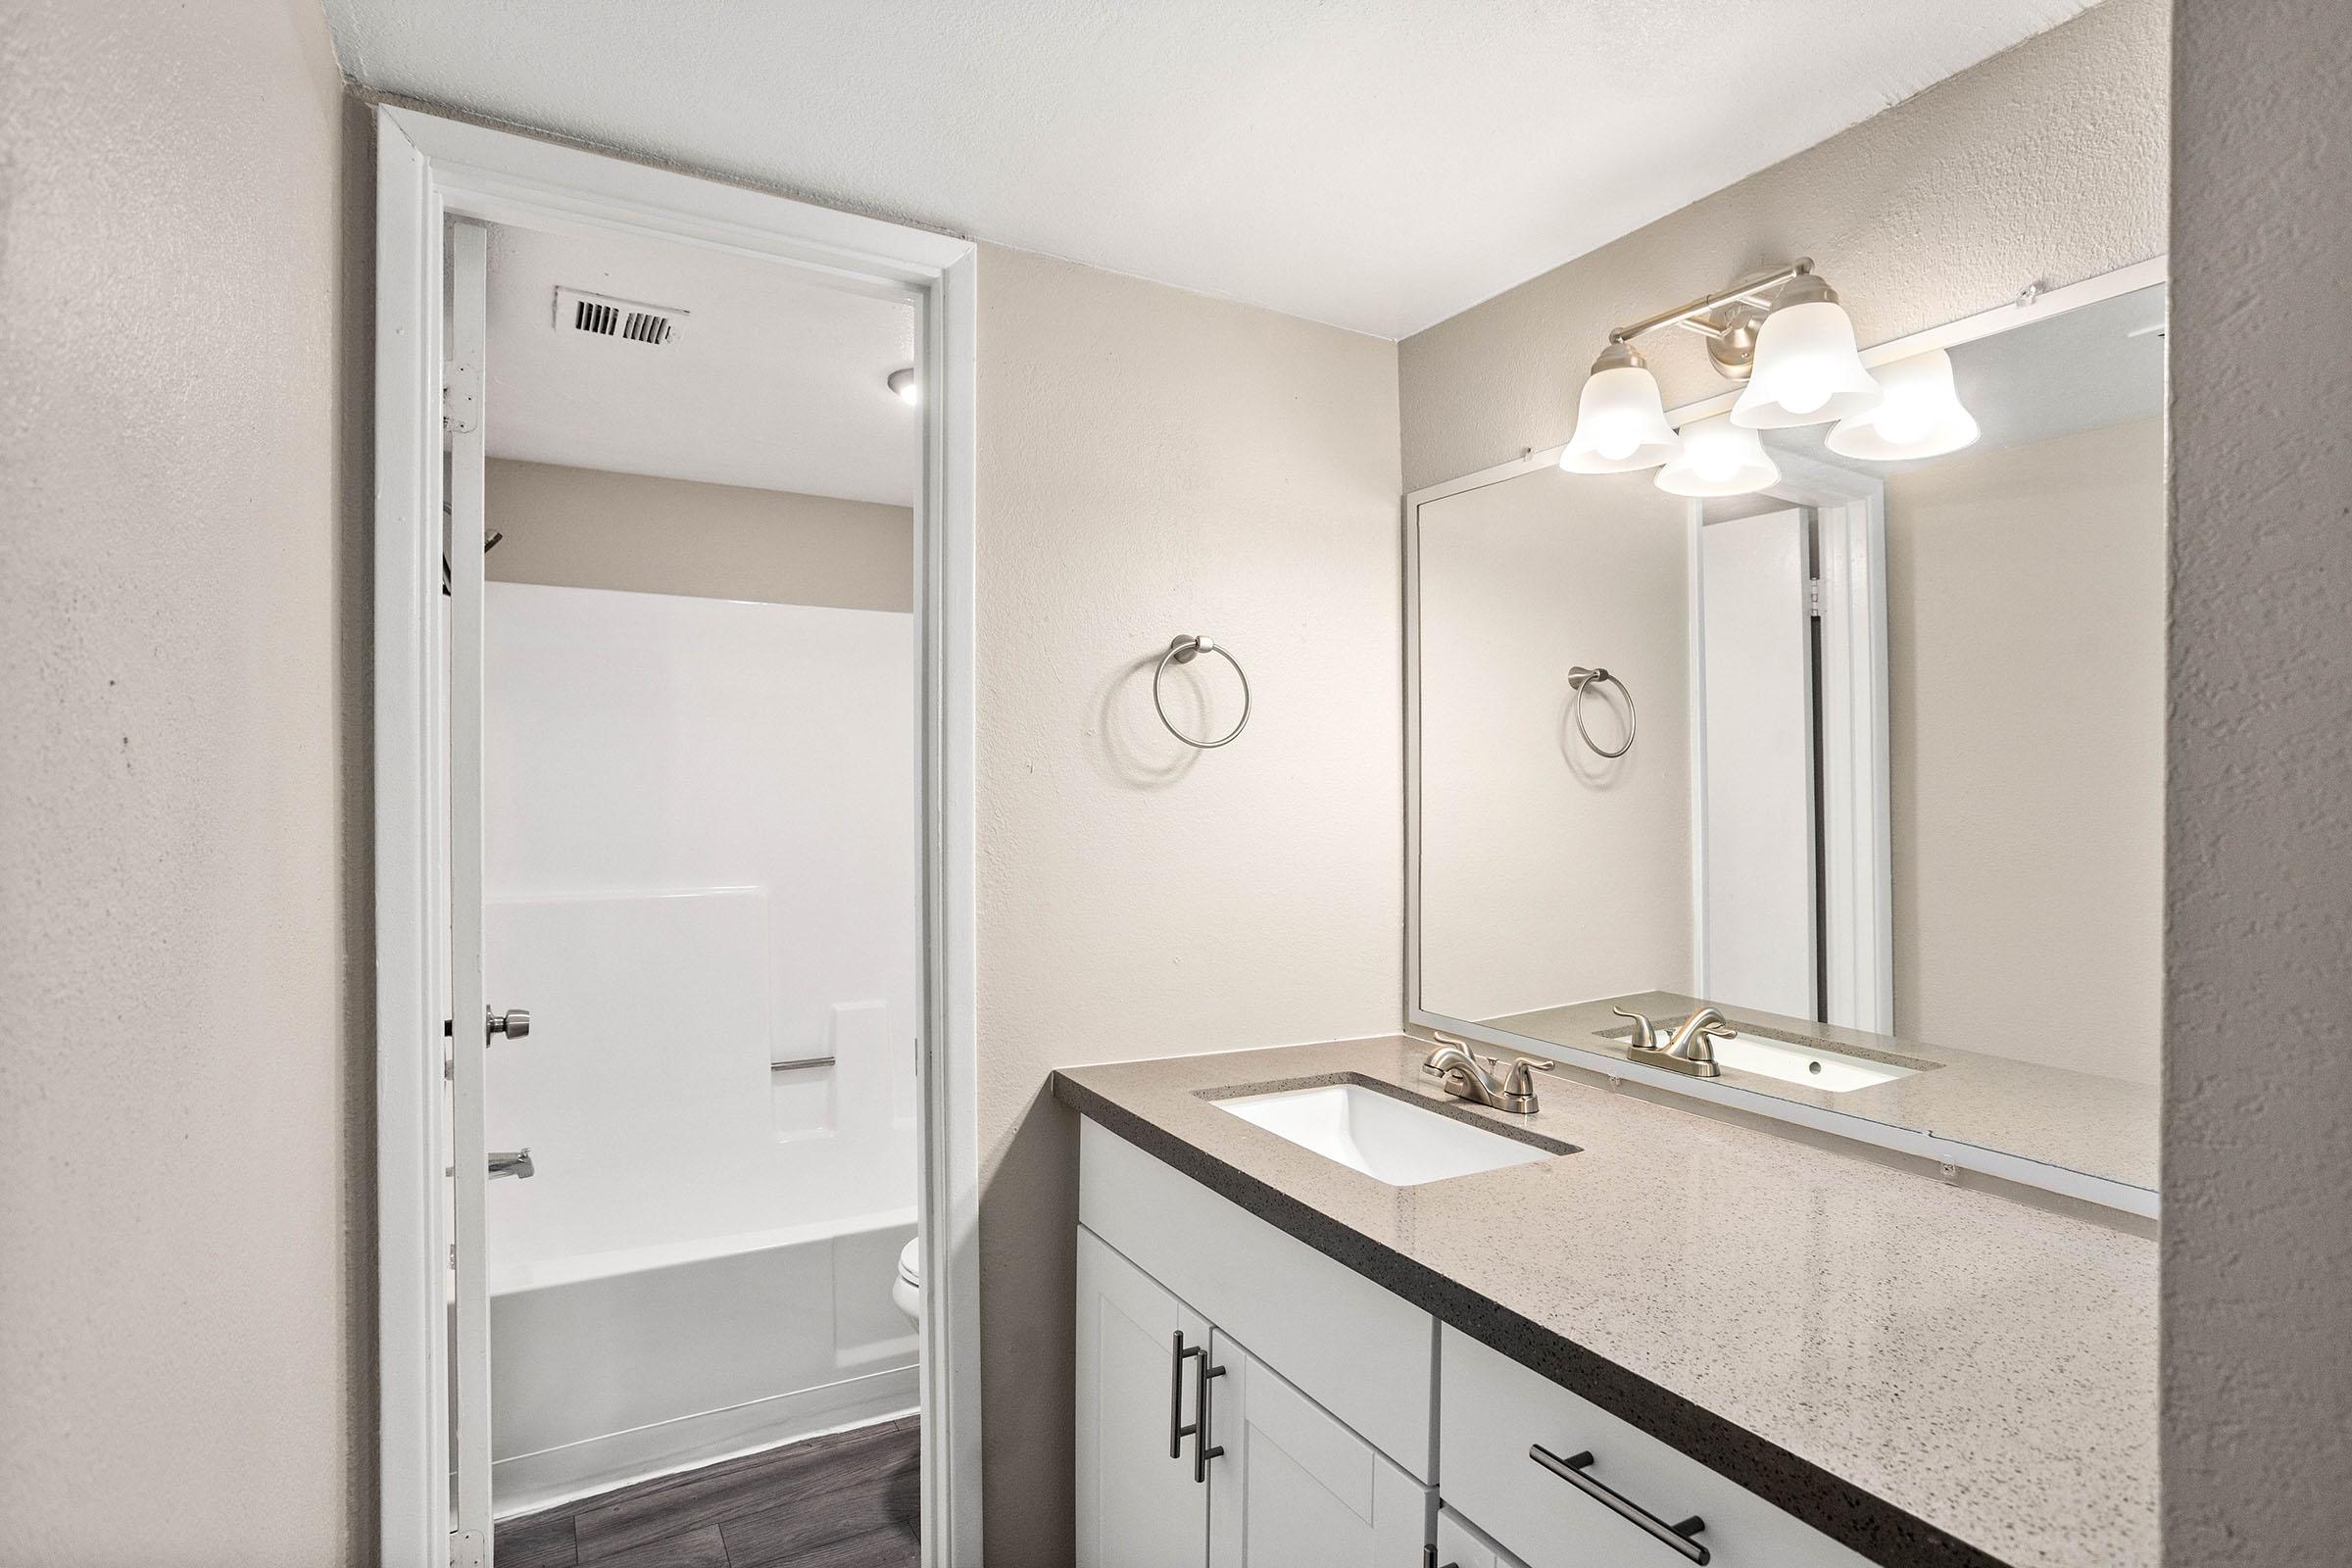 renovated bathroom with quartz countertops, white cabinets, and a large wall mirror